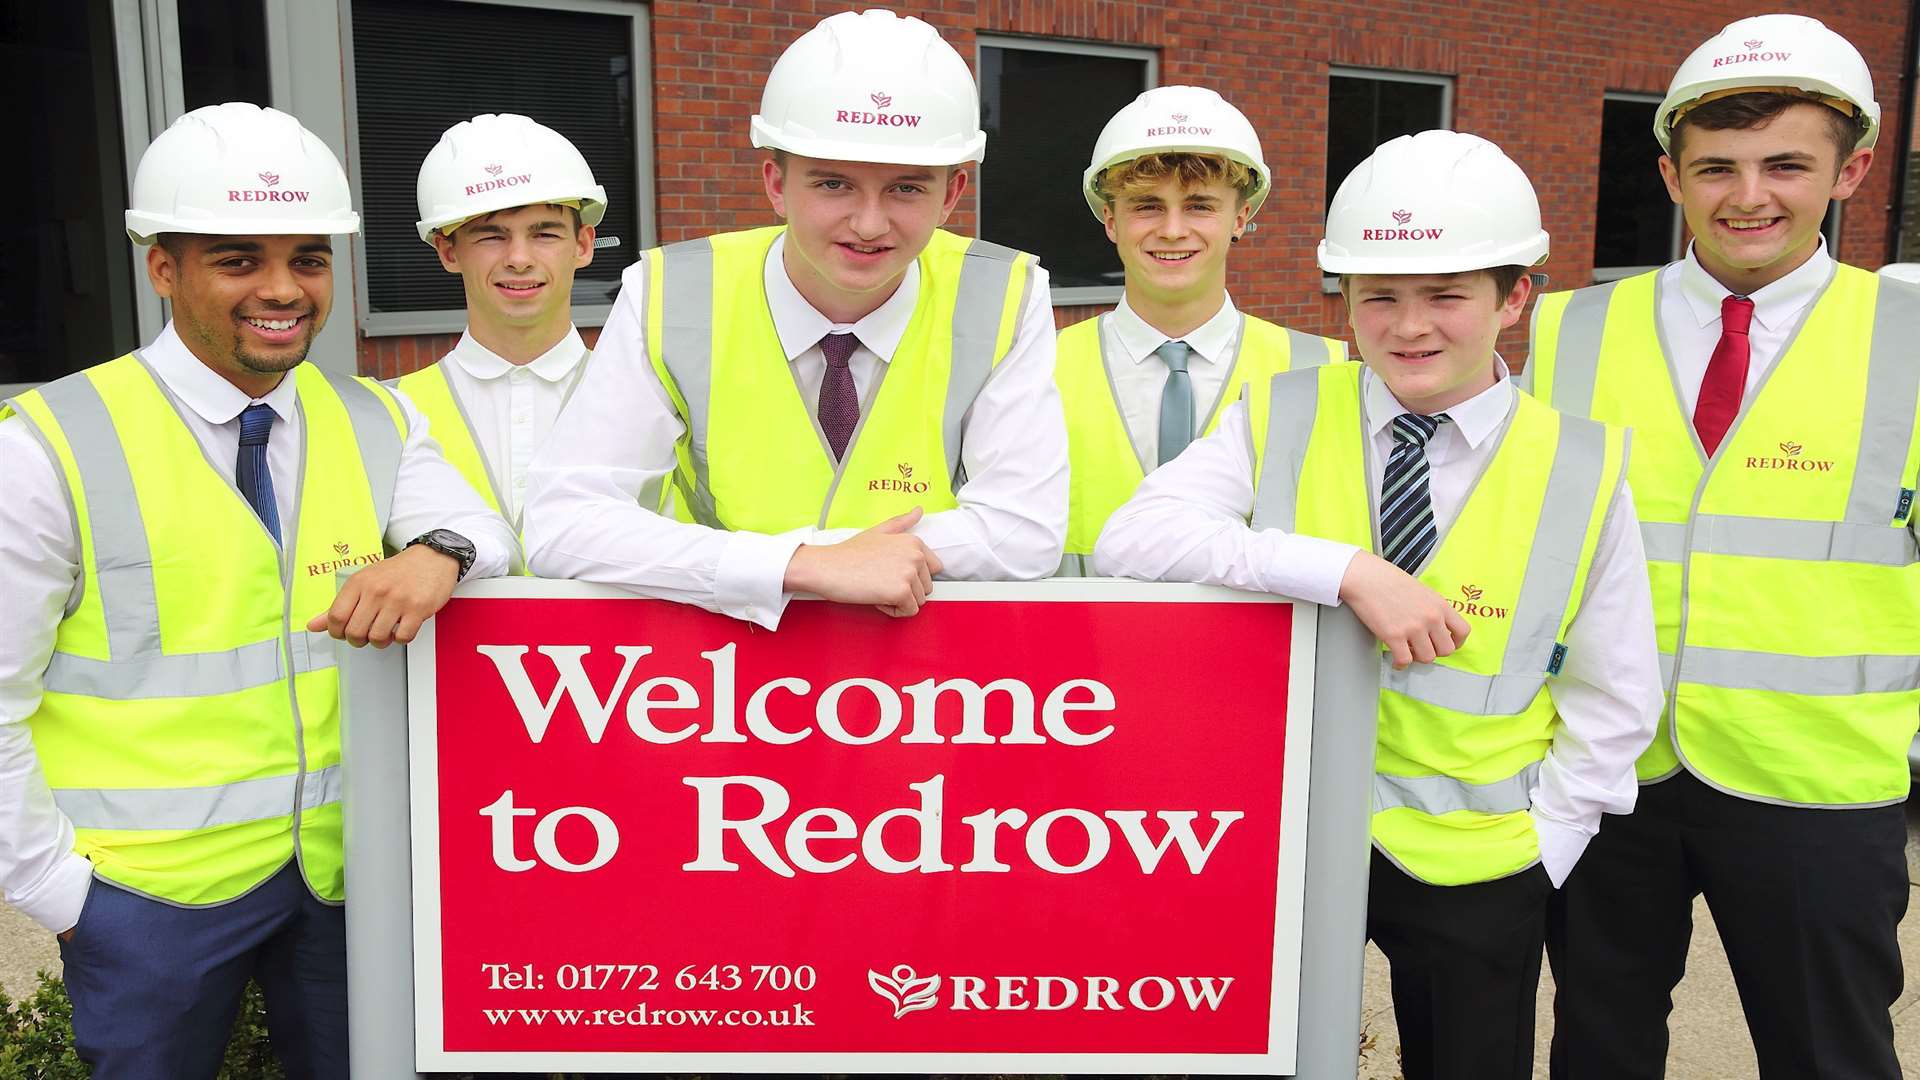 Redrow is recruiting 100 apprentices across England and Wales, including 10 in Kent